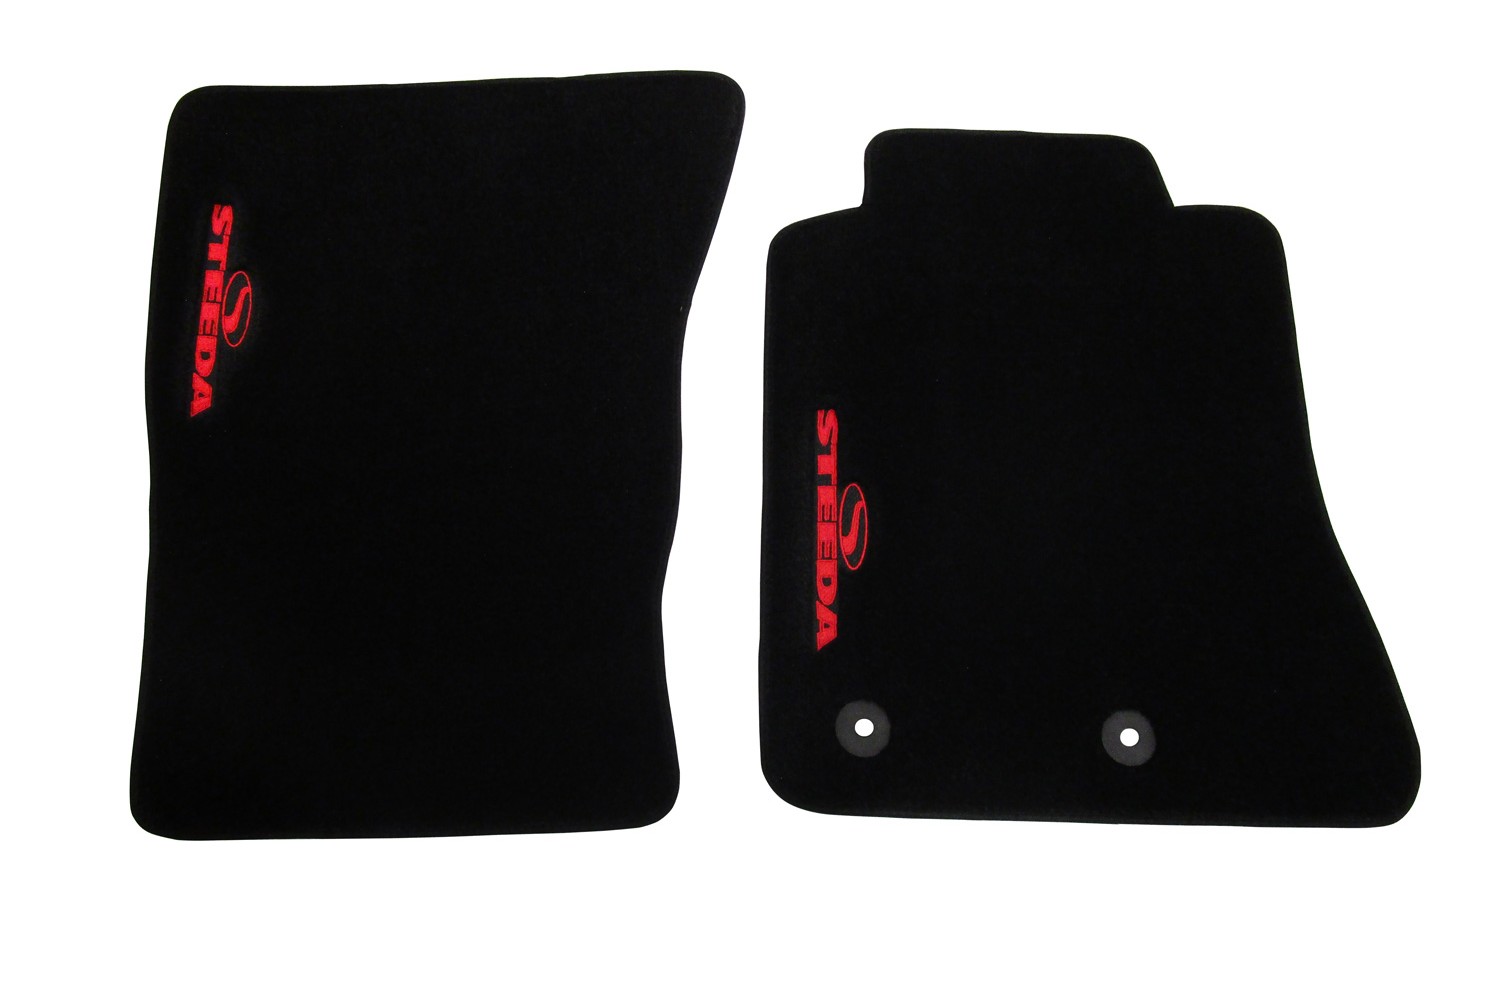 Why No Embroidered Gt Floor Mats For An S550 Page 2 2015